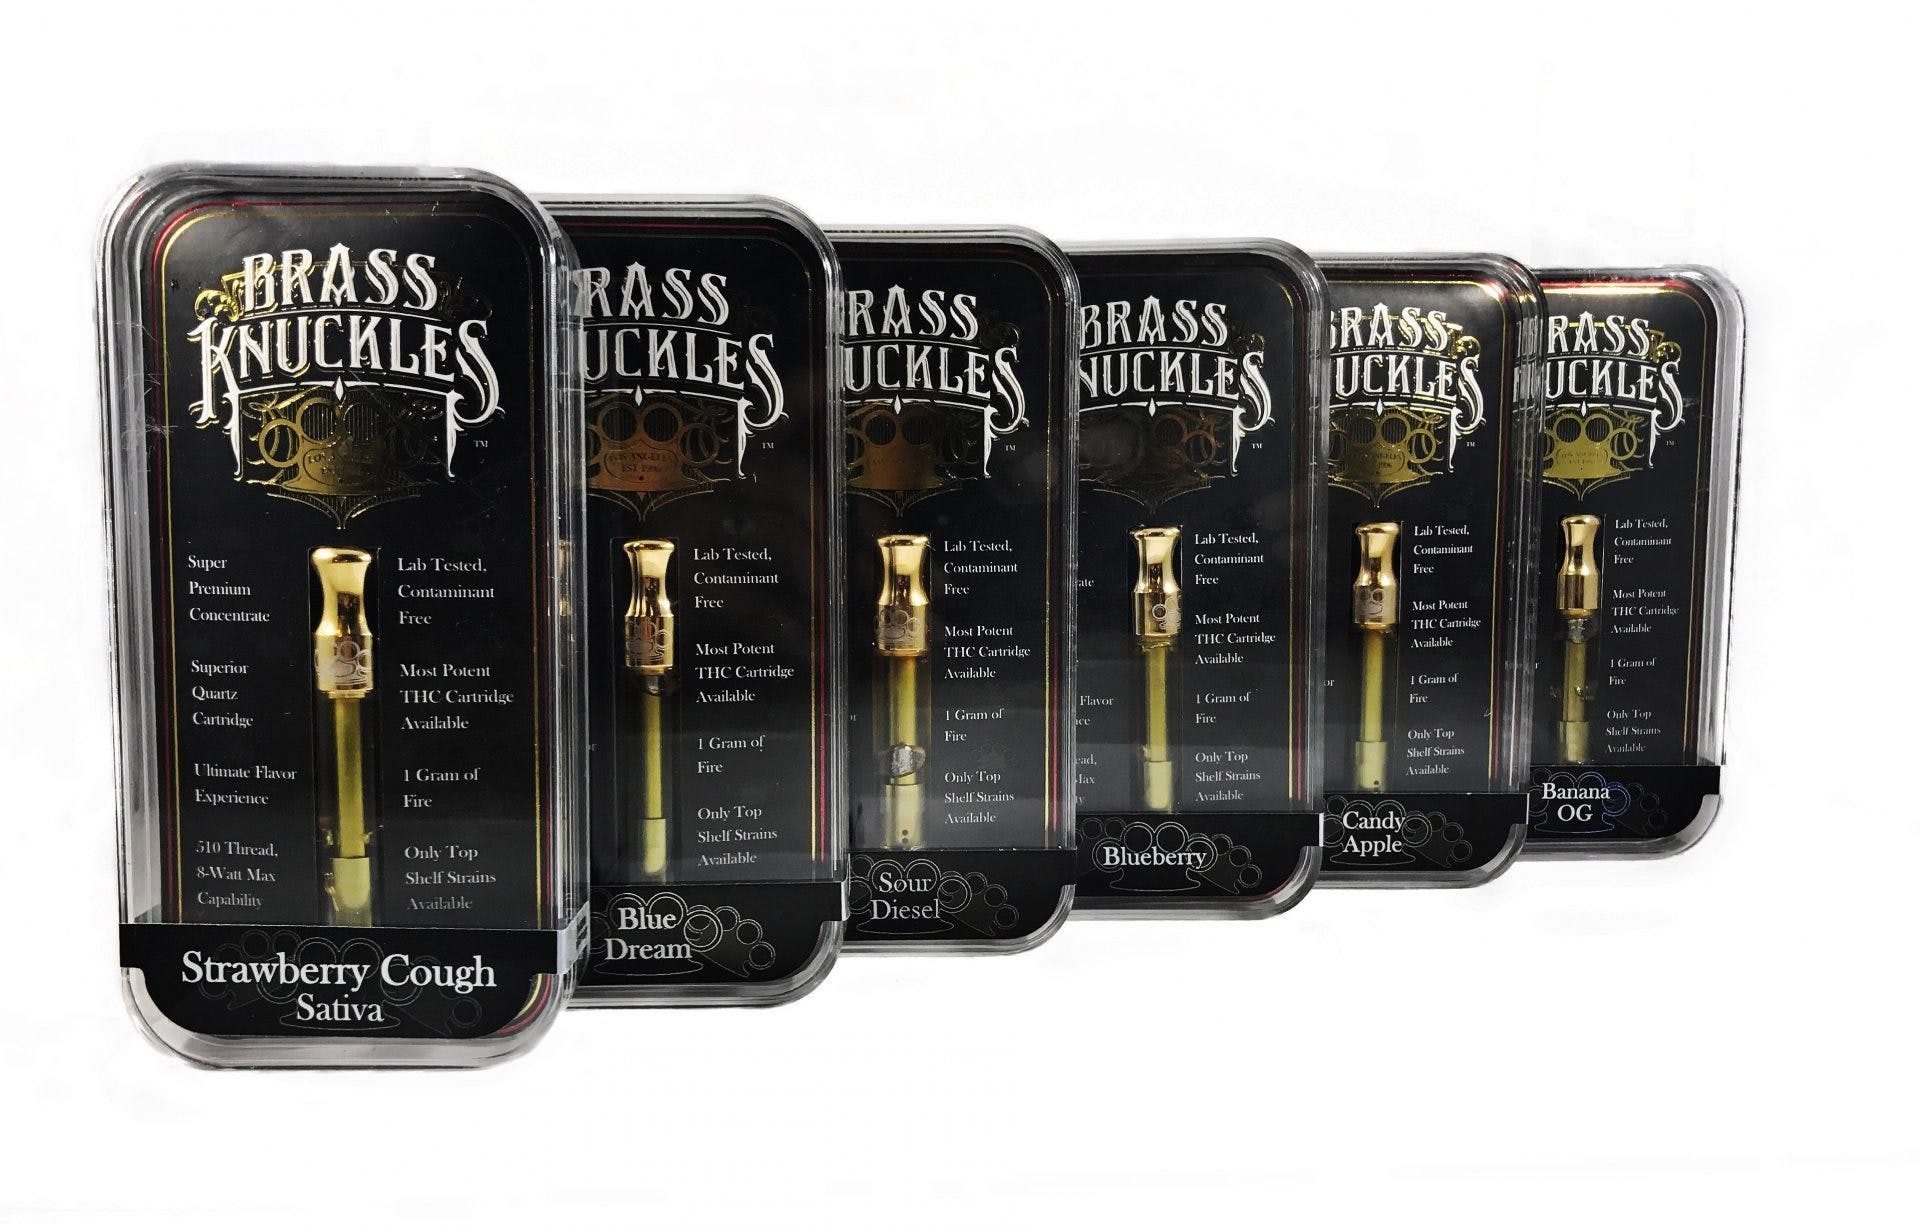 concentrate-brass-knuckles-tangie-3-for-only-90-21-mix-and-match